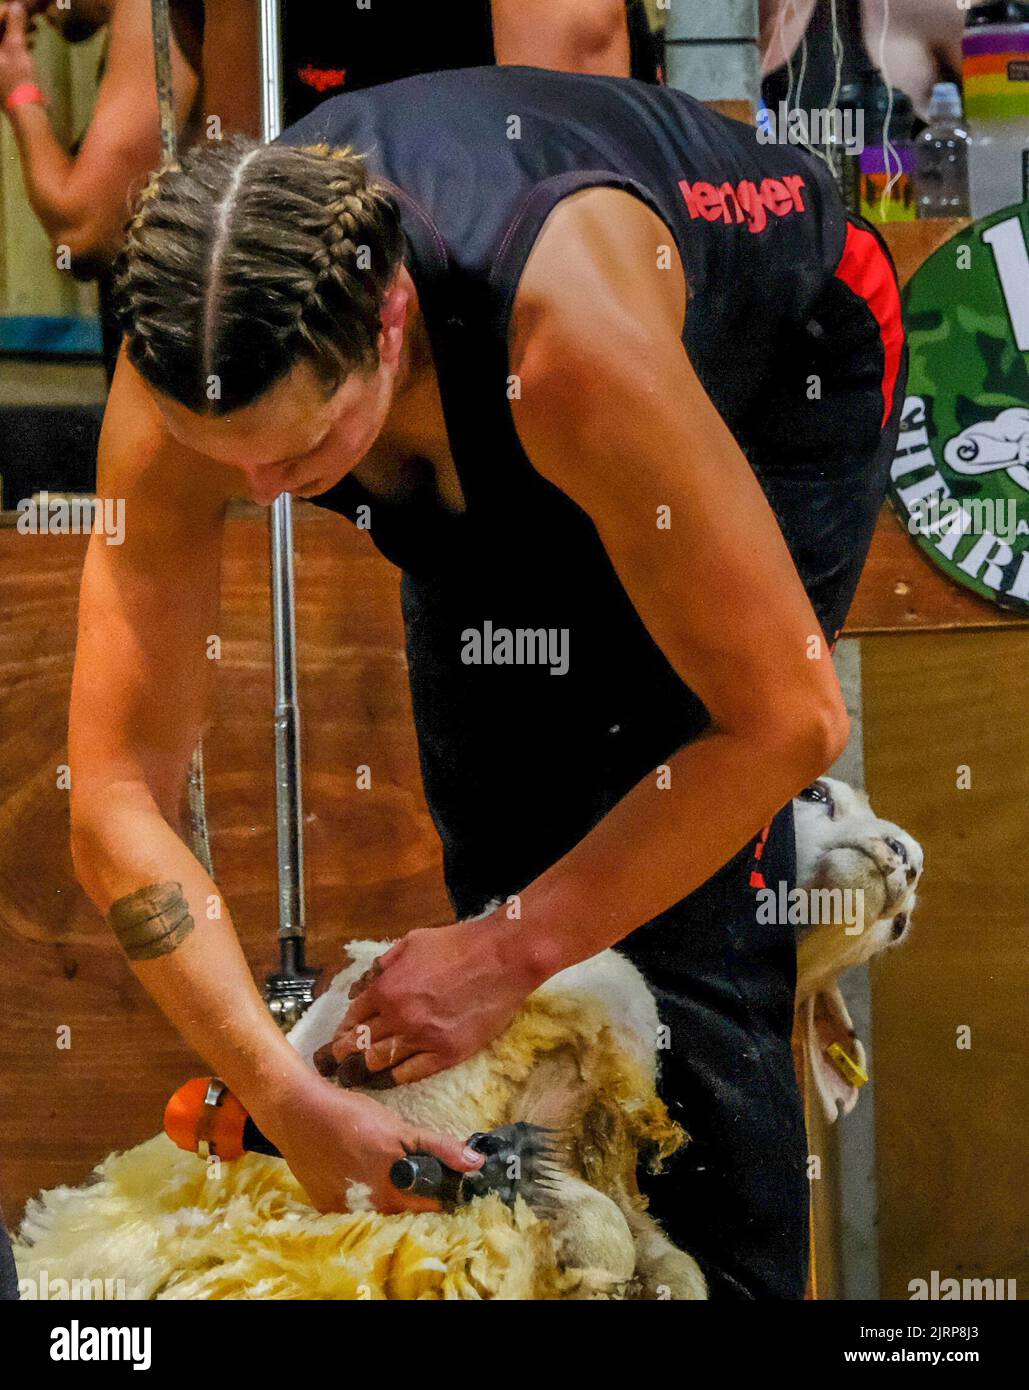 St Clether Cornwall UK. Marie Prebble attempting a record breaking shearing record.Marie's goal is shear as many ewe in eight hours.Marie Prebble will try and set the first ever eight hour womans strong wool record. The action was taking place at Trefranck Farm St Clether. Credit: charlie bryan/Alamy Live News Stock Photo